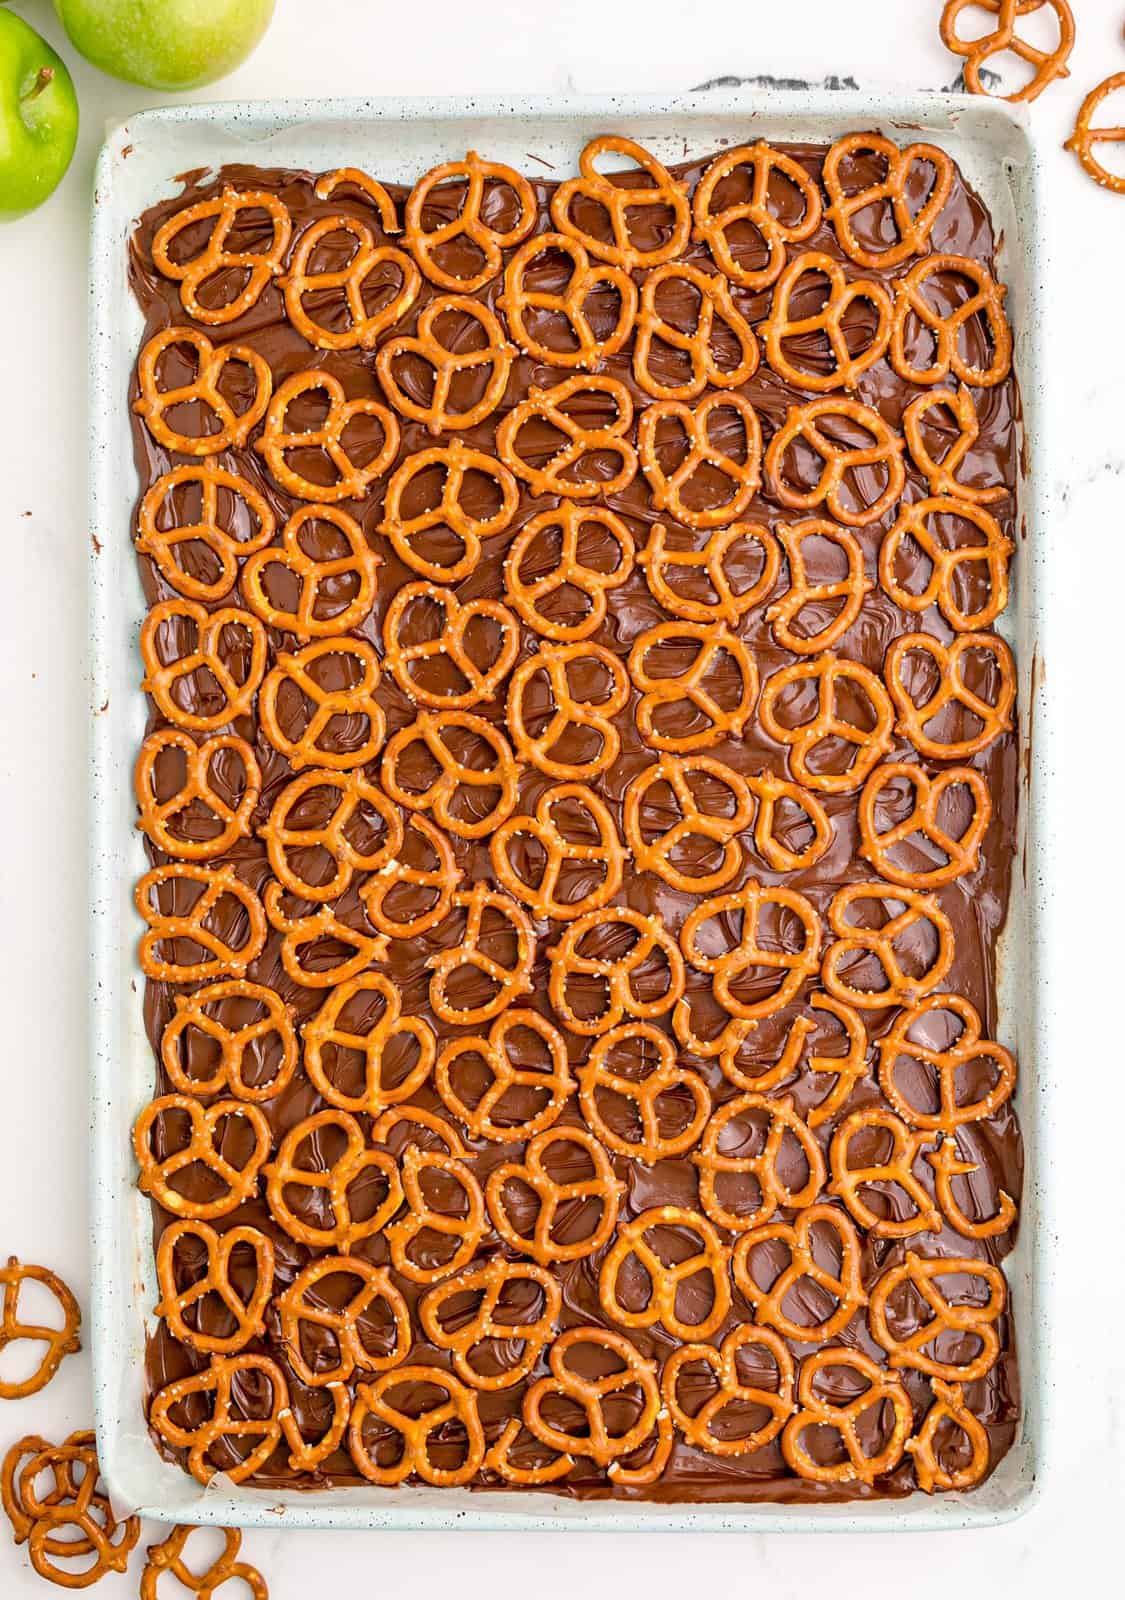 Pretzels placed over chocolate.